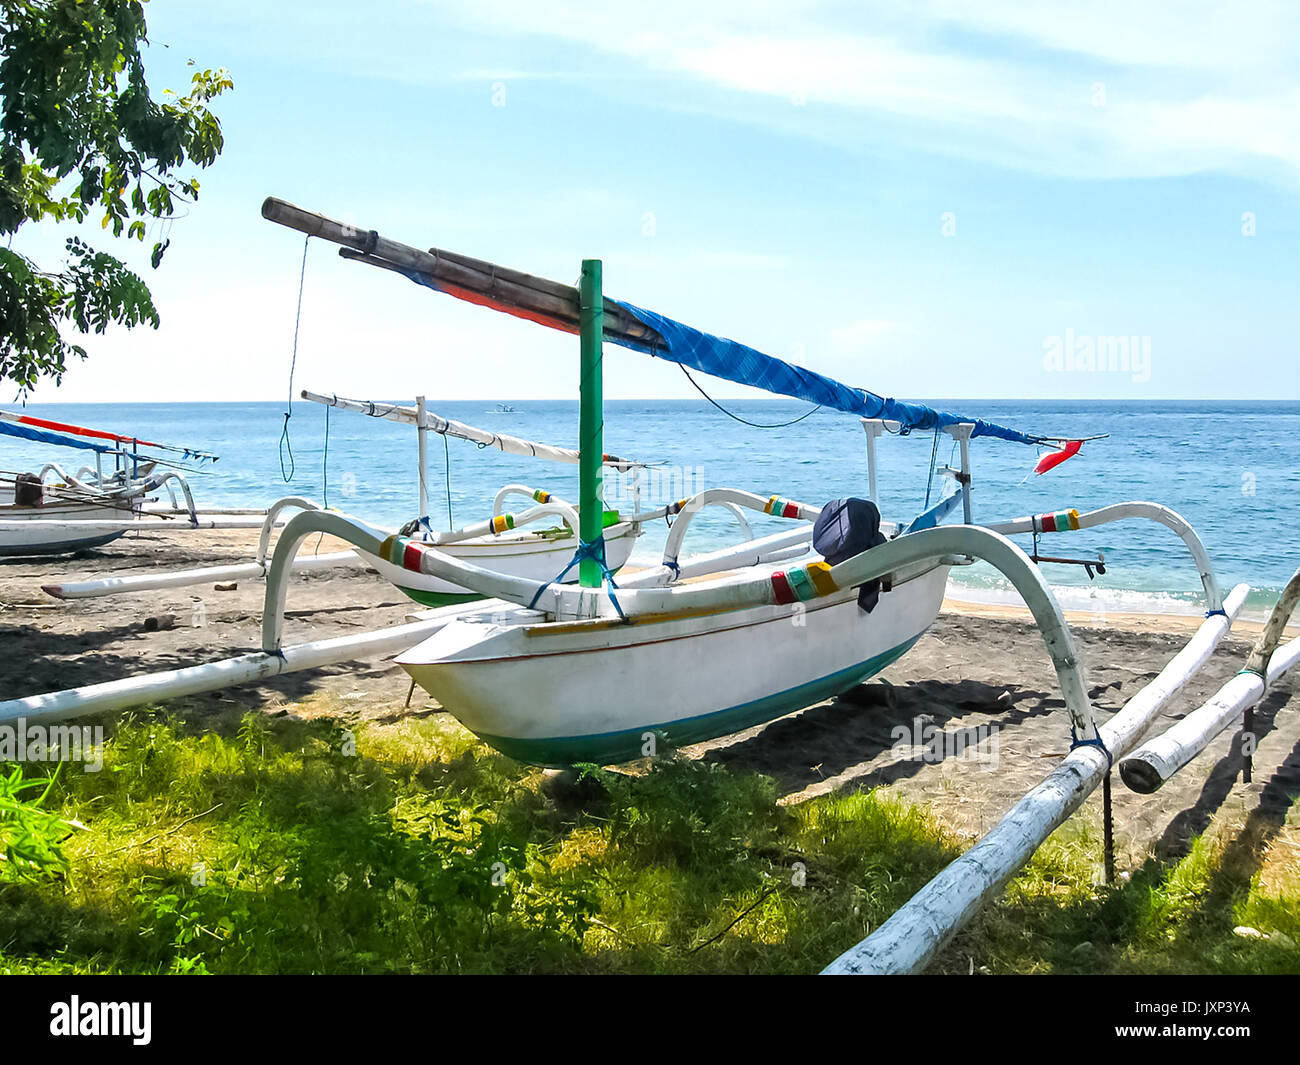 Traditional Balinese boat on a Amed beach in Bali, Indonesia Stock Photo